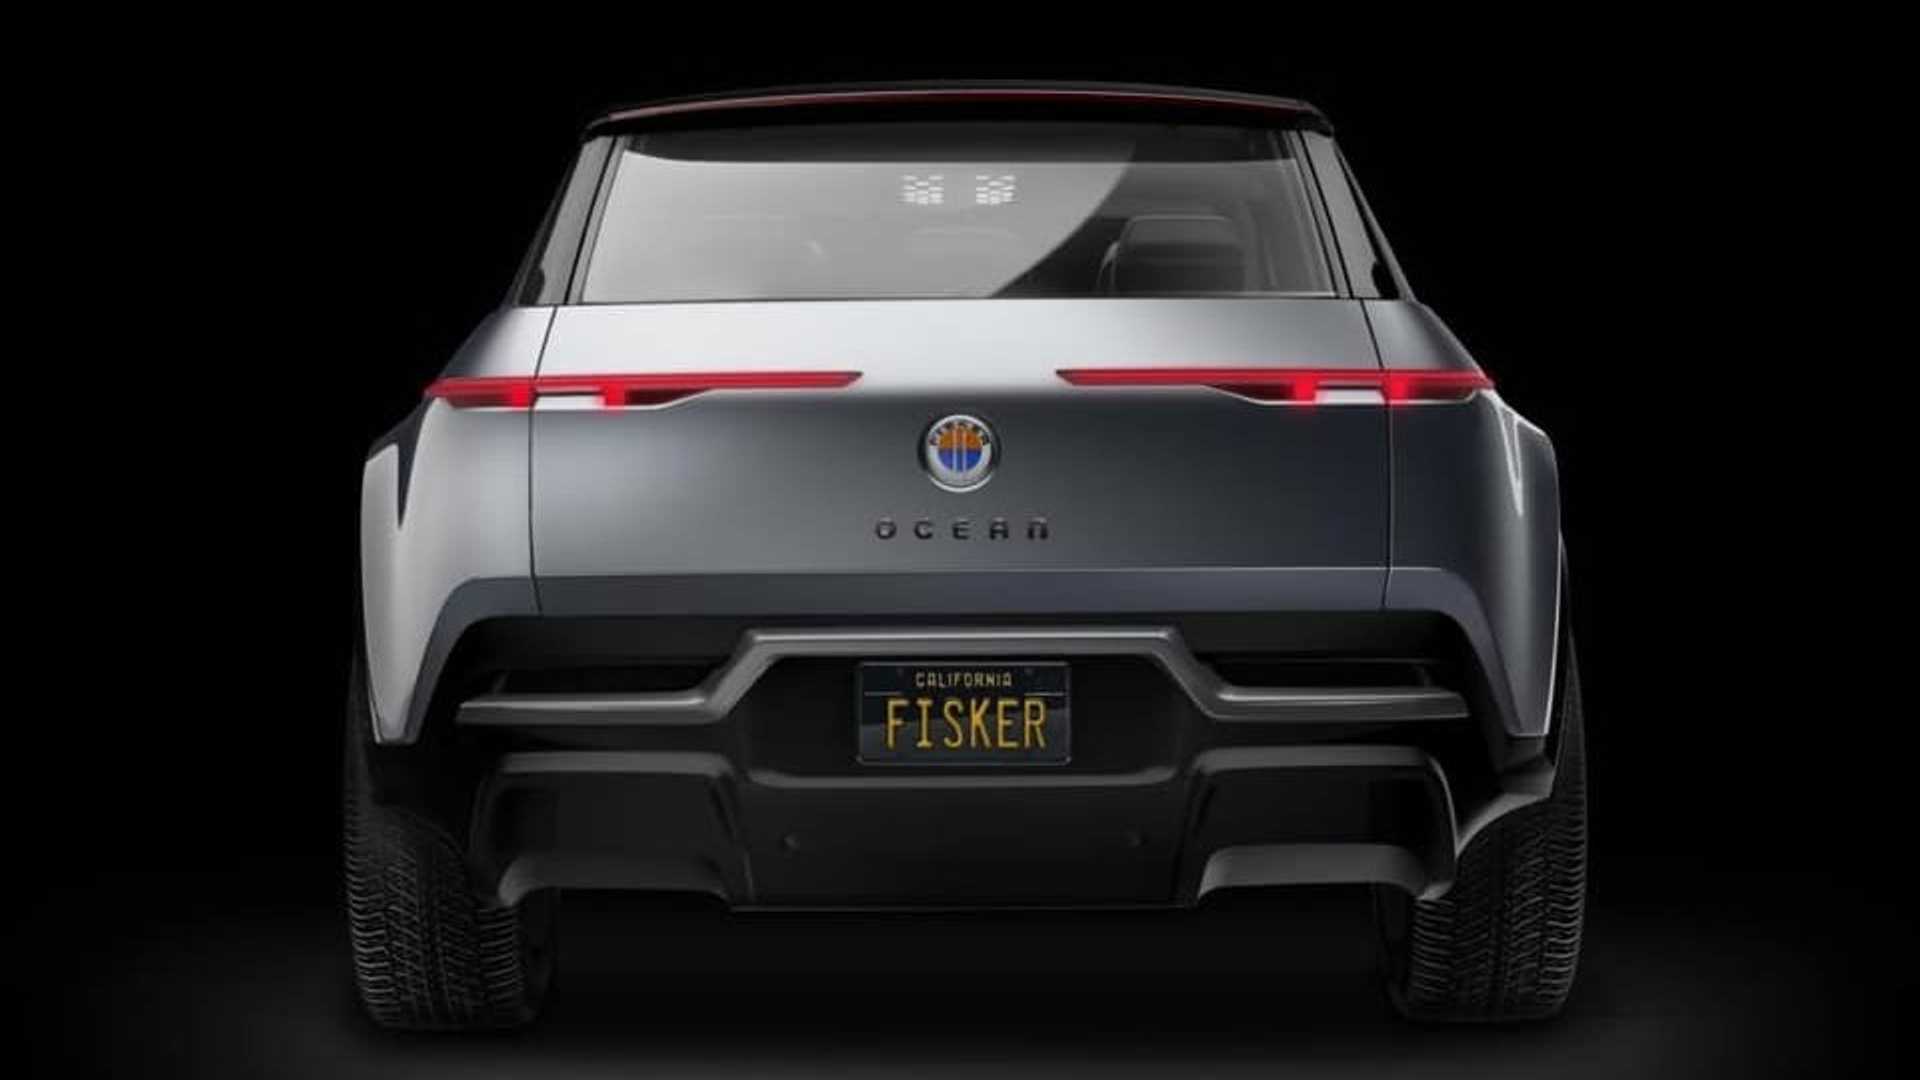 2022-fisker-ocean-electric-suv-dubbed-world-s-most-sustainable-vehicle